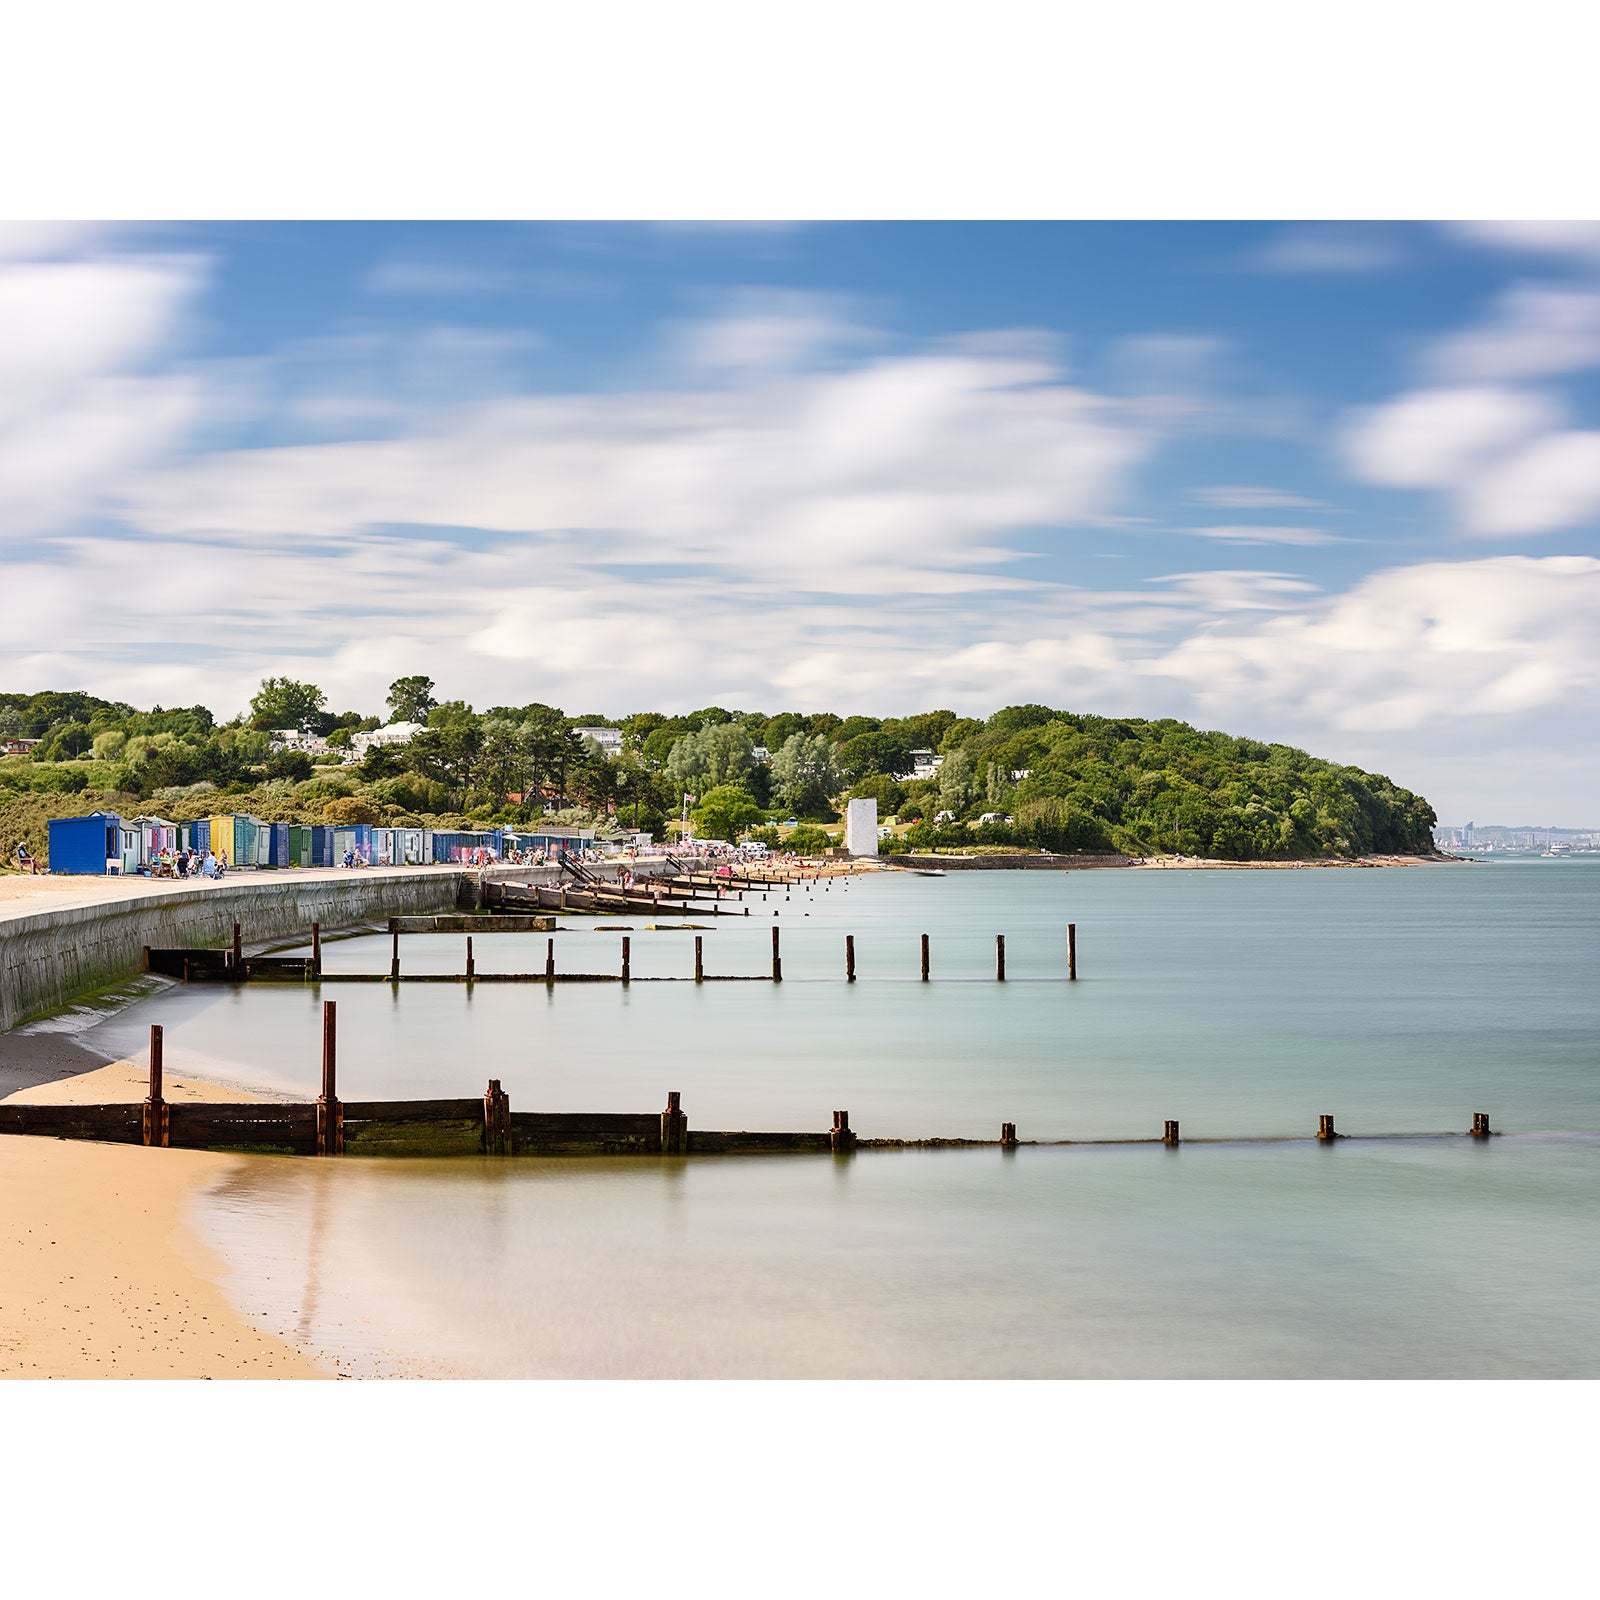 St. Helens Beach with a wooden pier leading into calm waters, beach huts in the distance on the Isle of Wight, and lush trees under a cloudy sky by Available Light Photography.